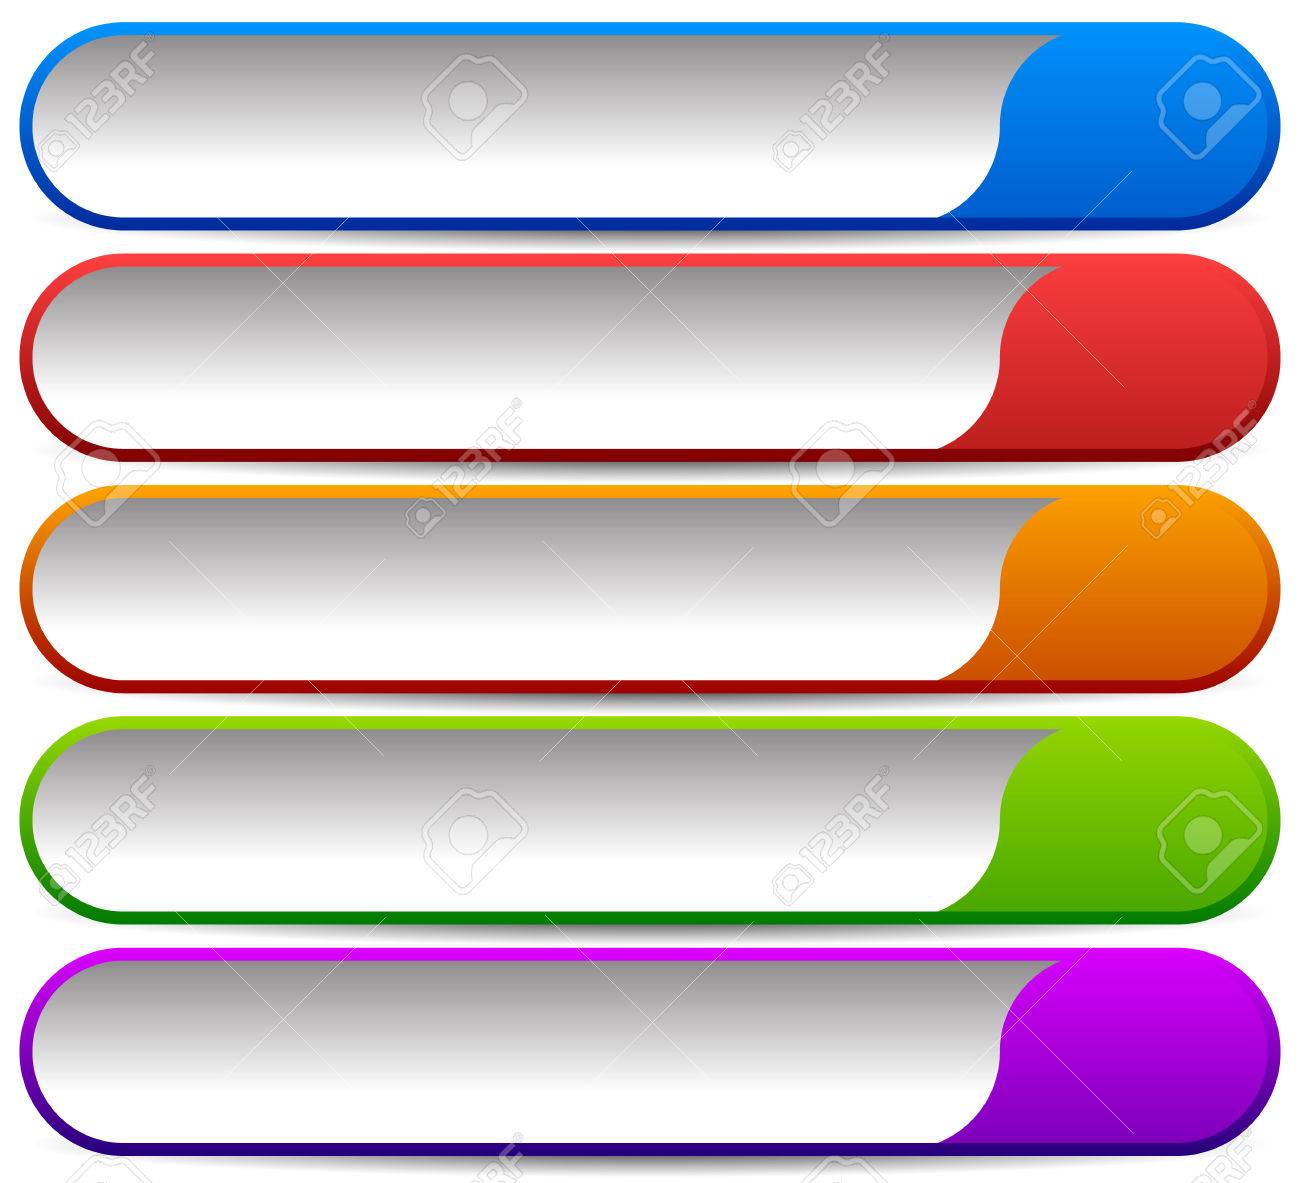 Colorful Button Banner Background Set Of Rectangular